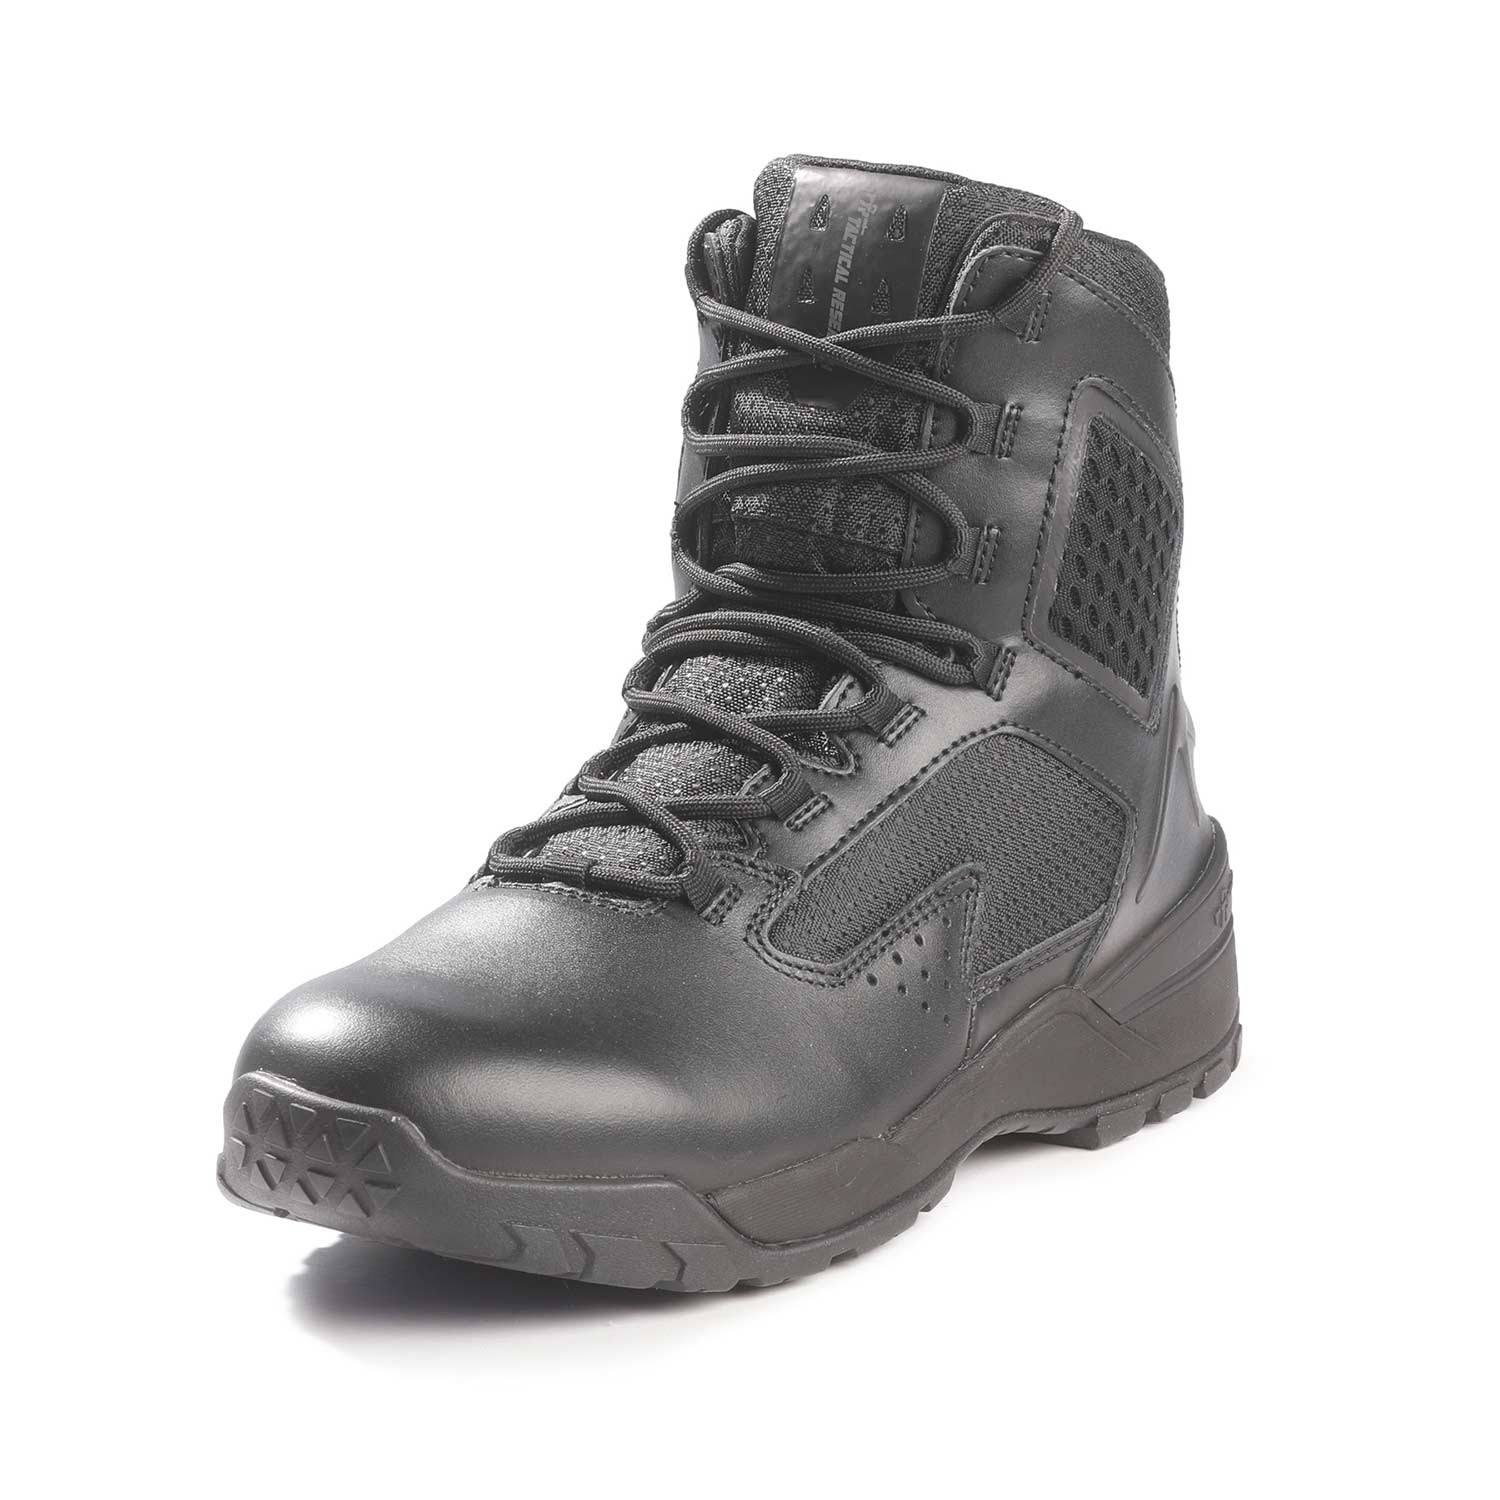 Tactical Research Ultralight 10-40 7" Side Zip Tactical Boot